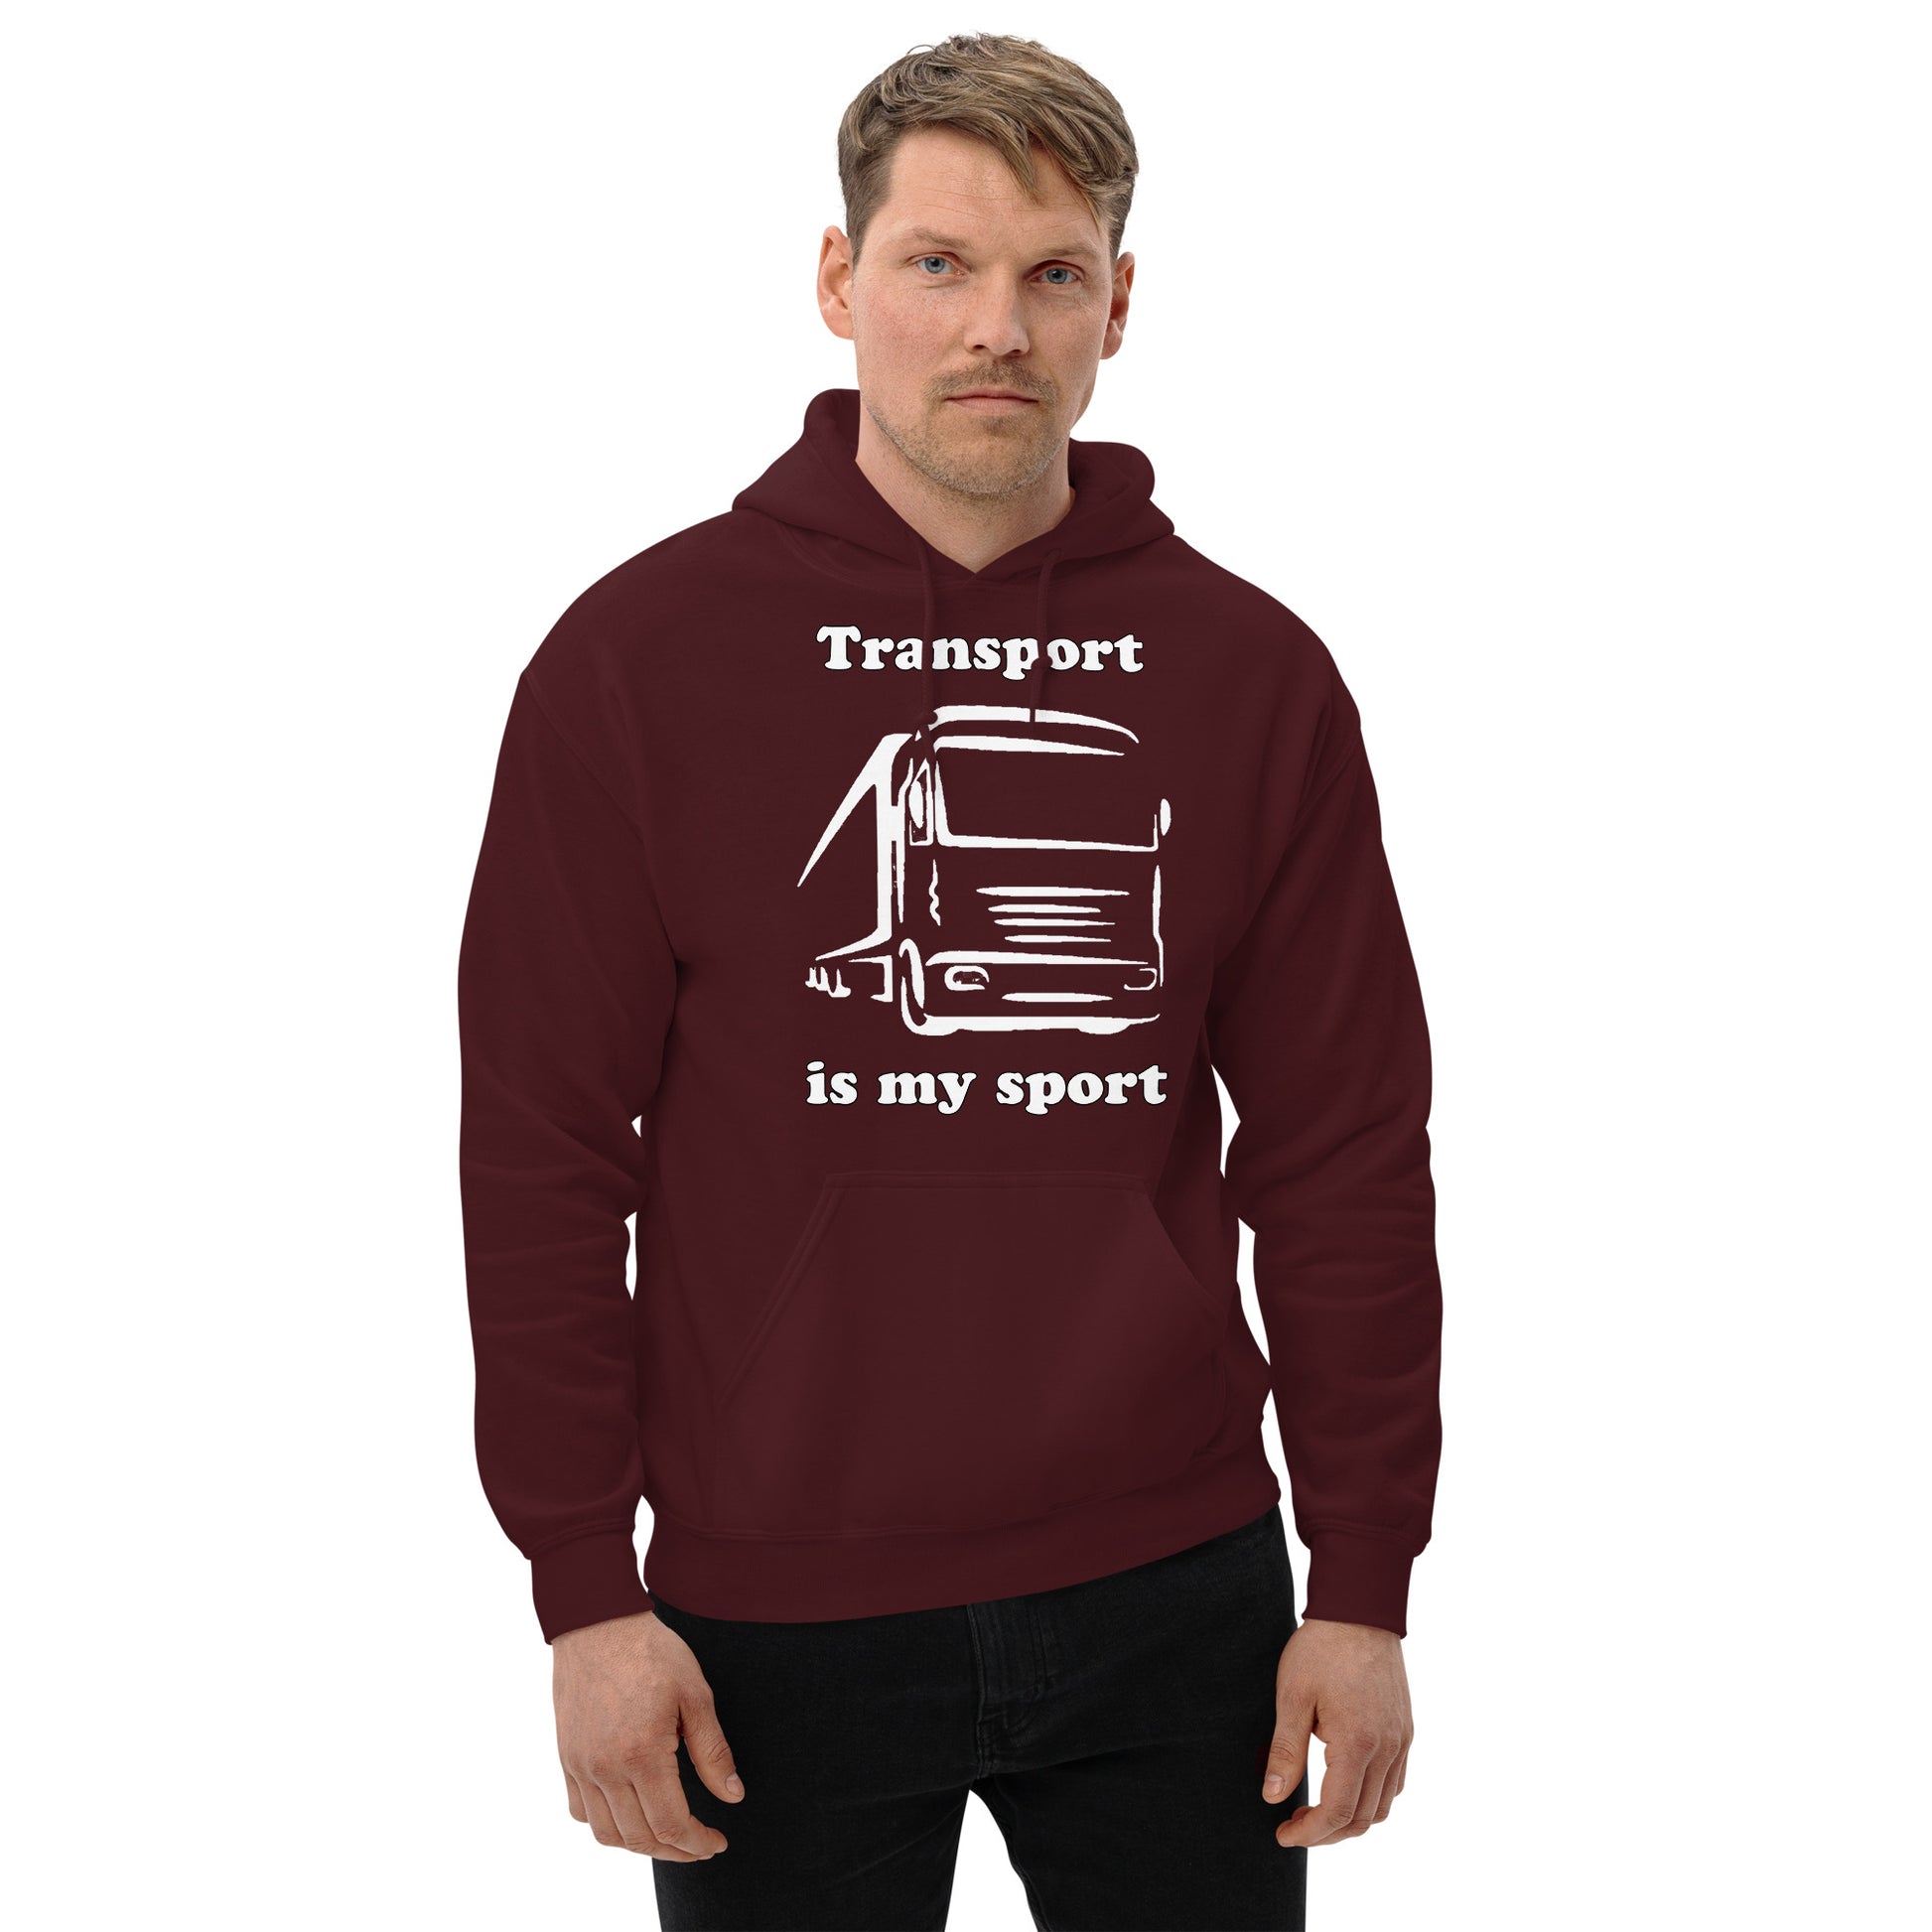 Man with maroon hoodie with picture of truck and text "Transport is my sport"